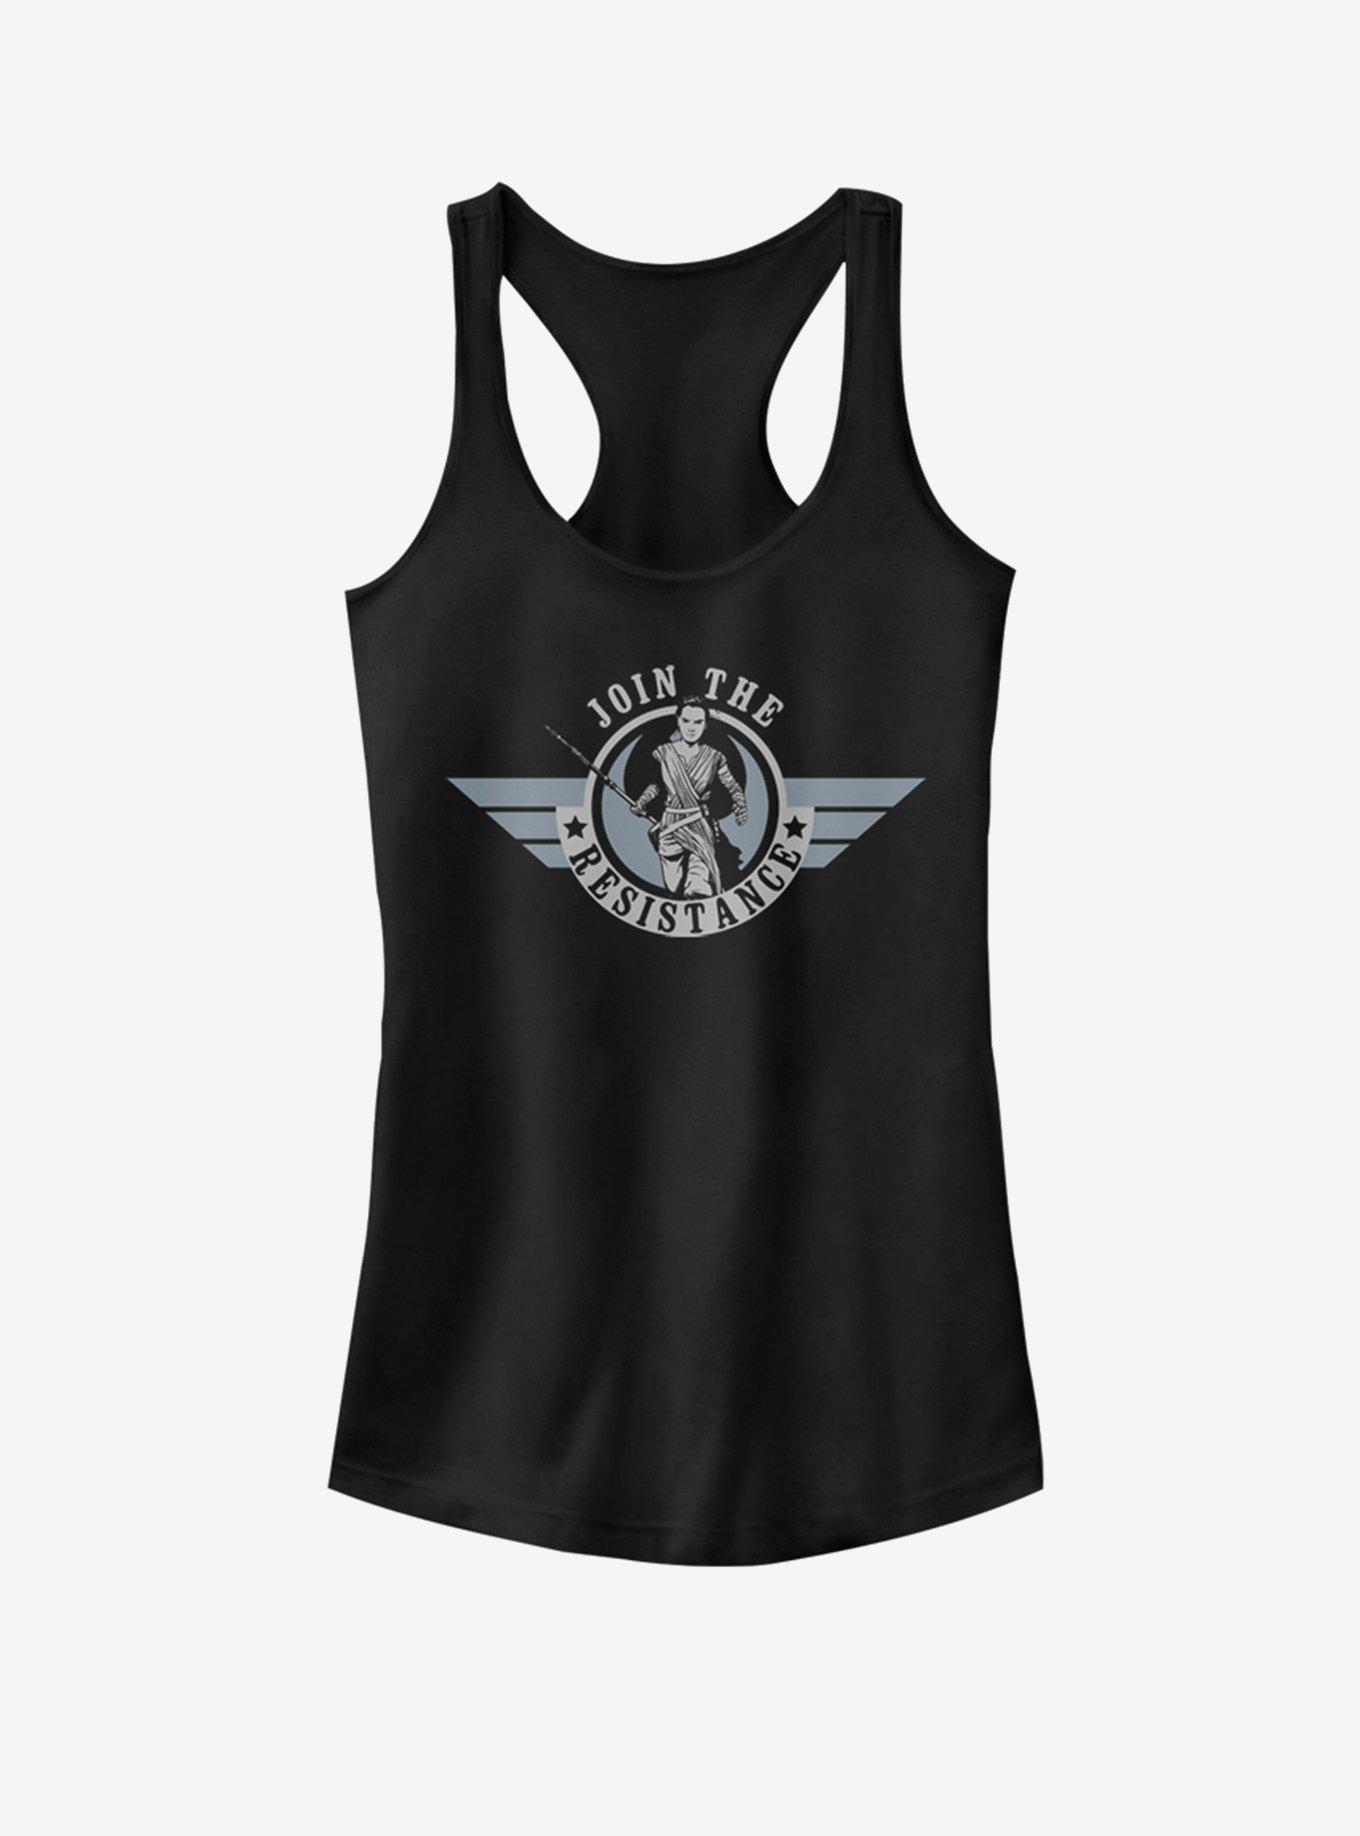 Star Wars Join The Resistance Girls Tank